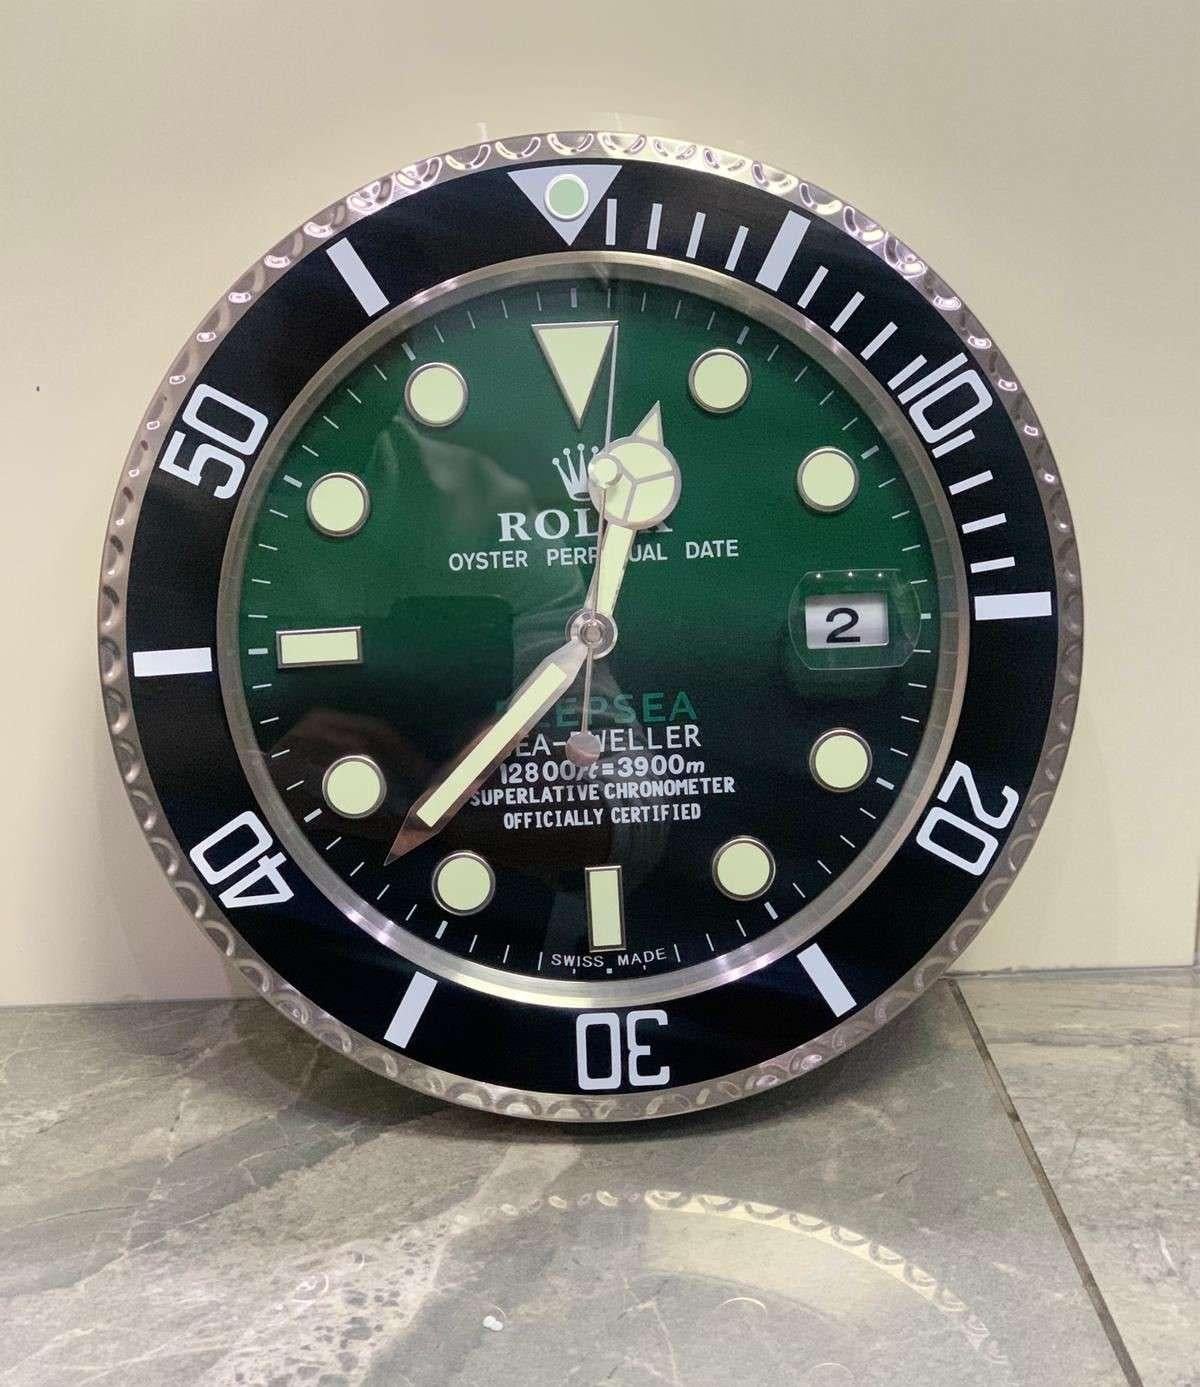 ROLEX Officially Certified Oyster Perpetual Sea Dweller Black Green Wall Clock. With luminous hands, sweeping hands.
Free international shipping.